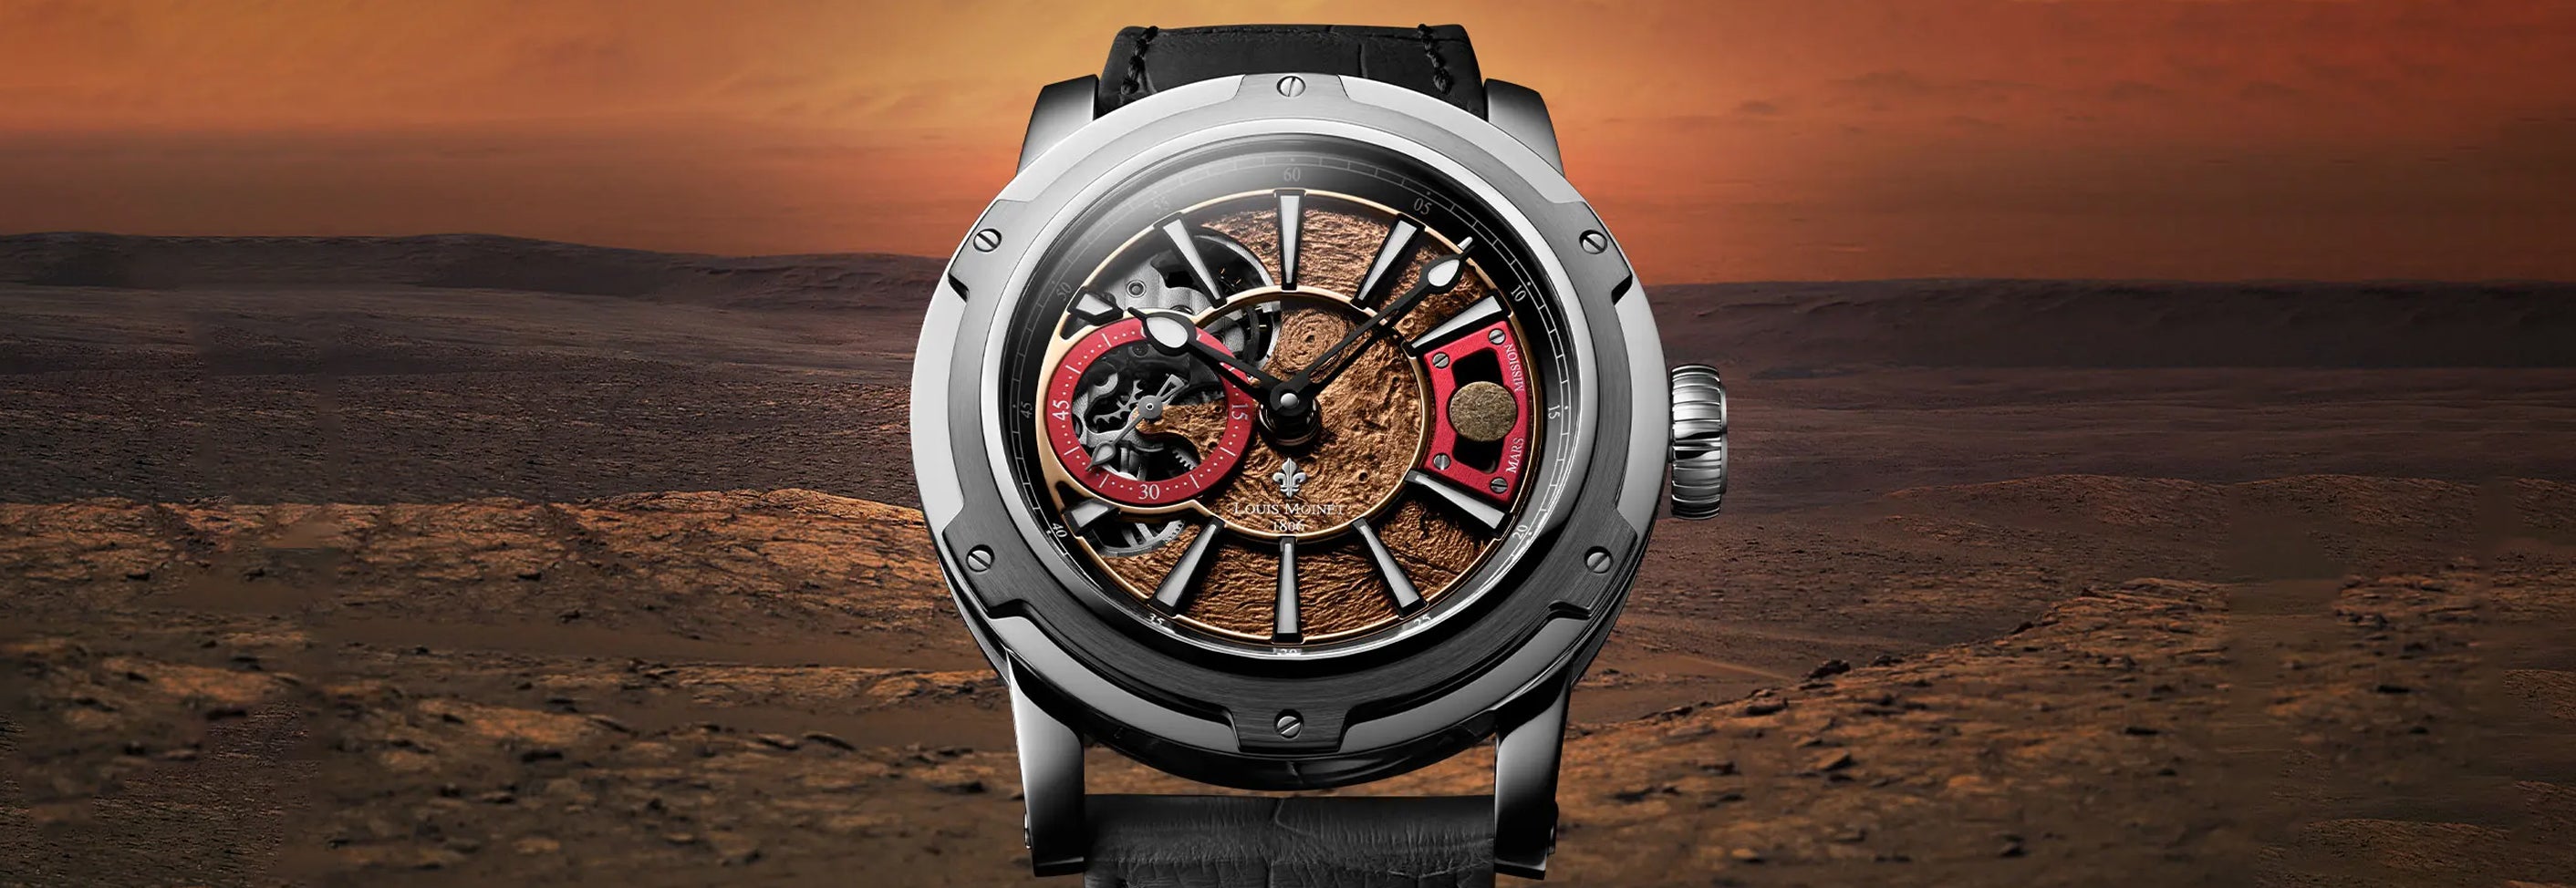 LOUIS MOINET product page banner